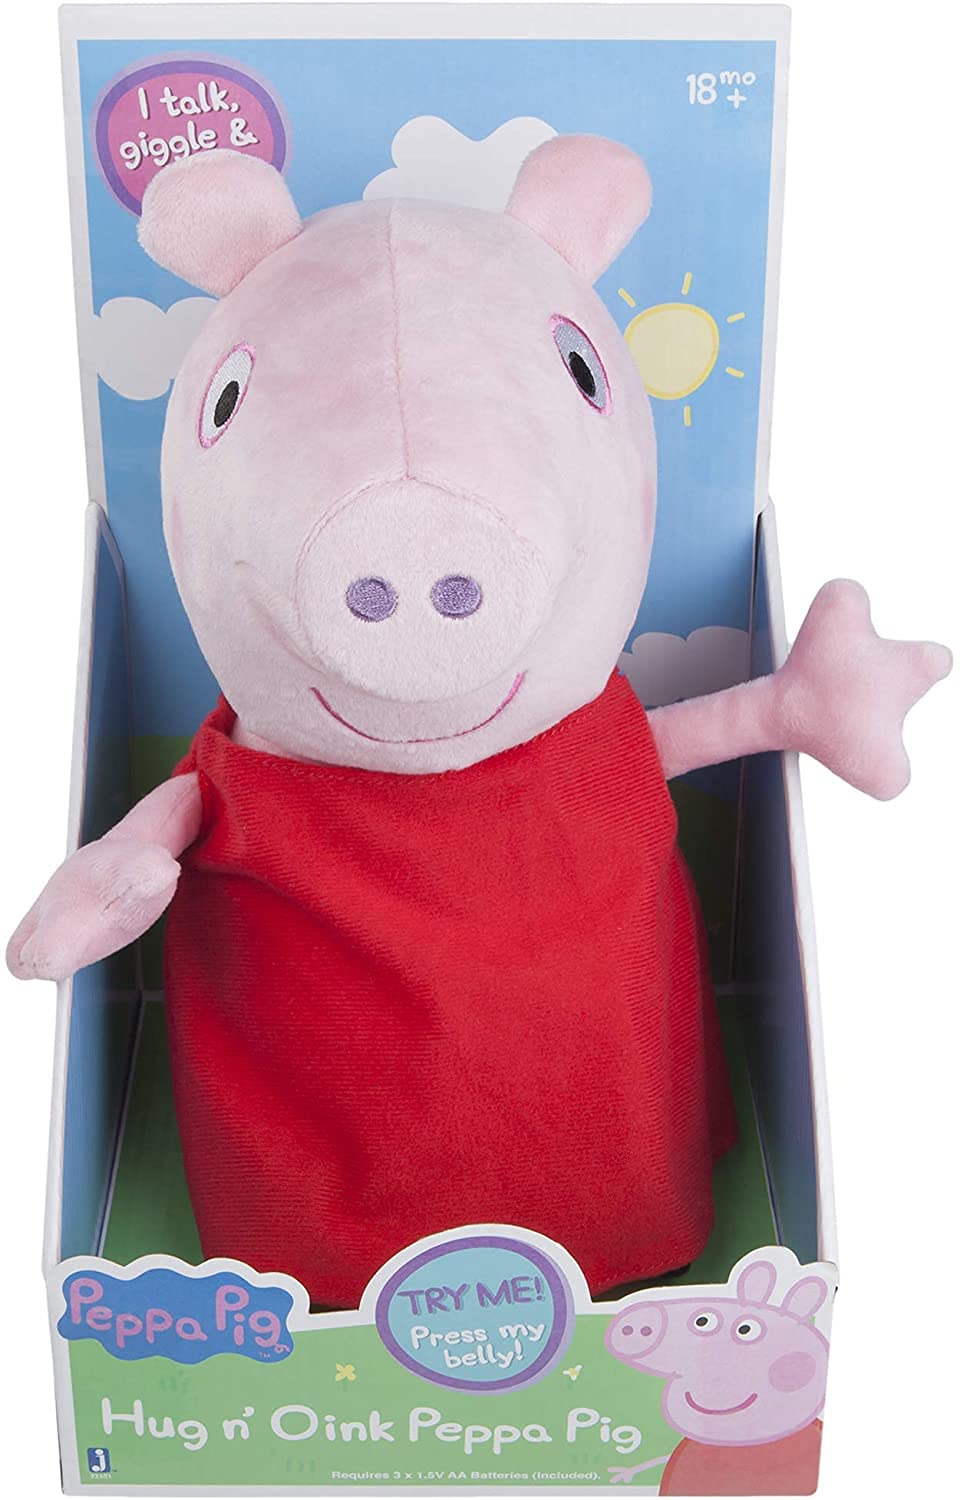 Peppa Pig Hug N' Oink Plush Stuffed Animal Toy, Large 12" - Press Peppa's Belly to Hear Her Talk, Giggle & Oink - Ages 18+ Months